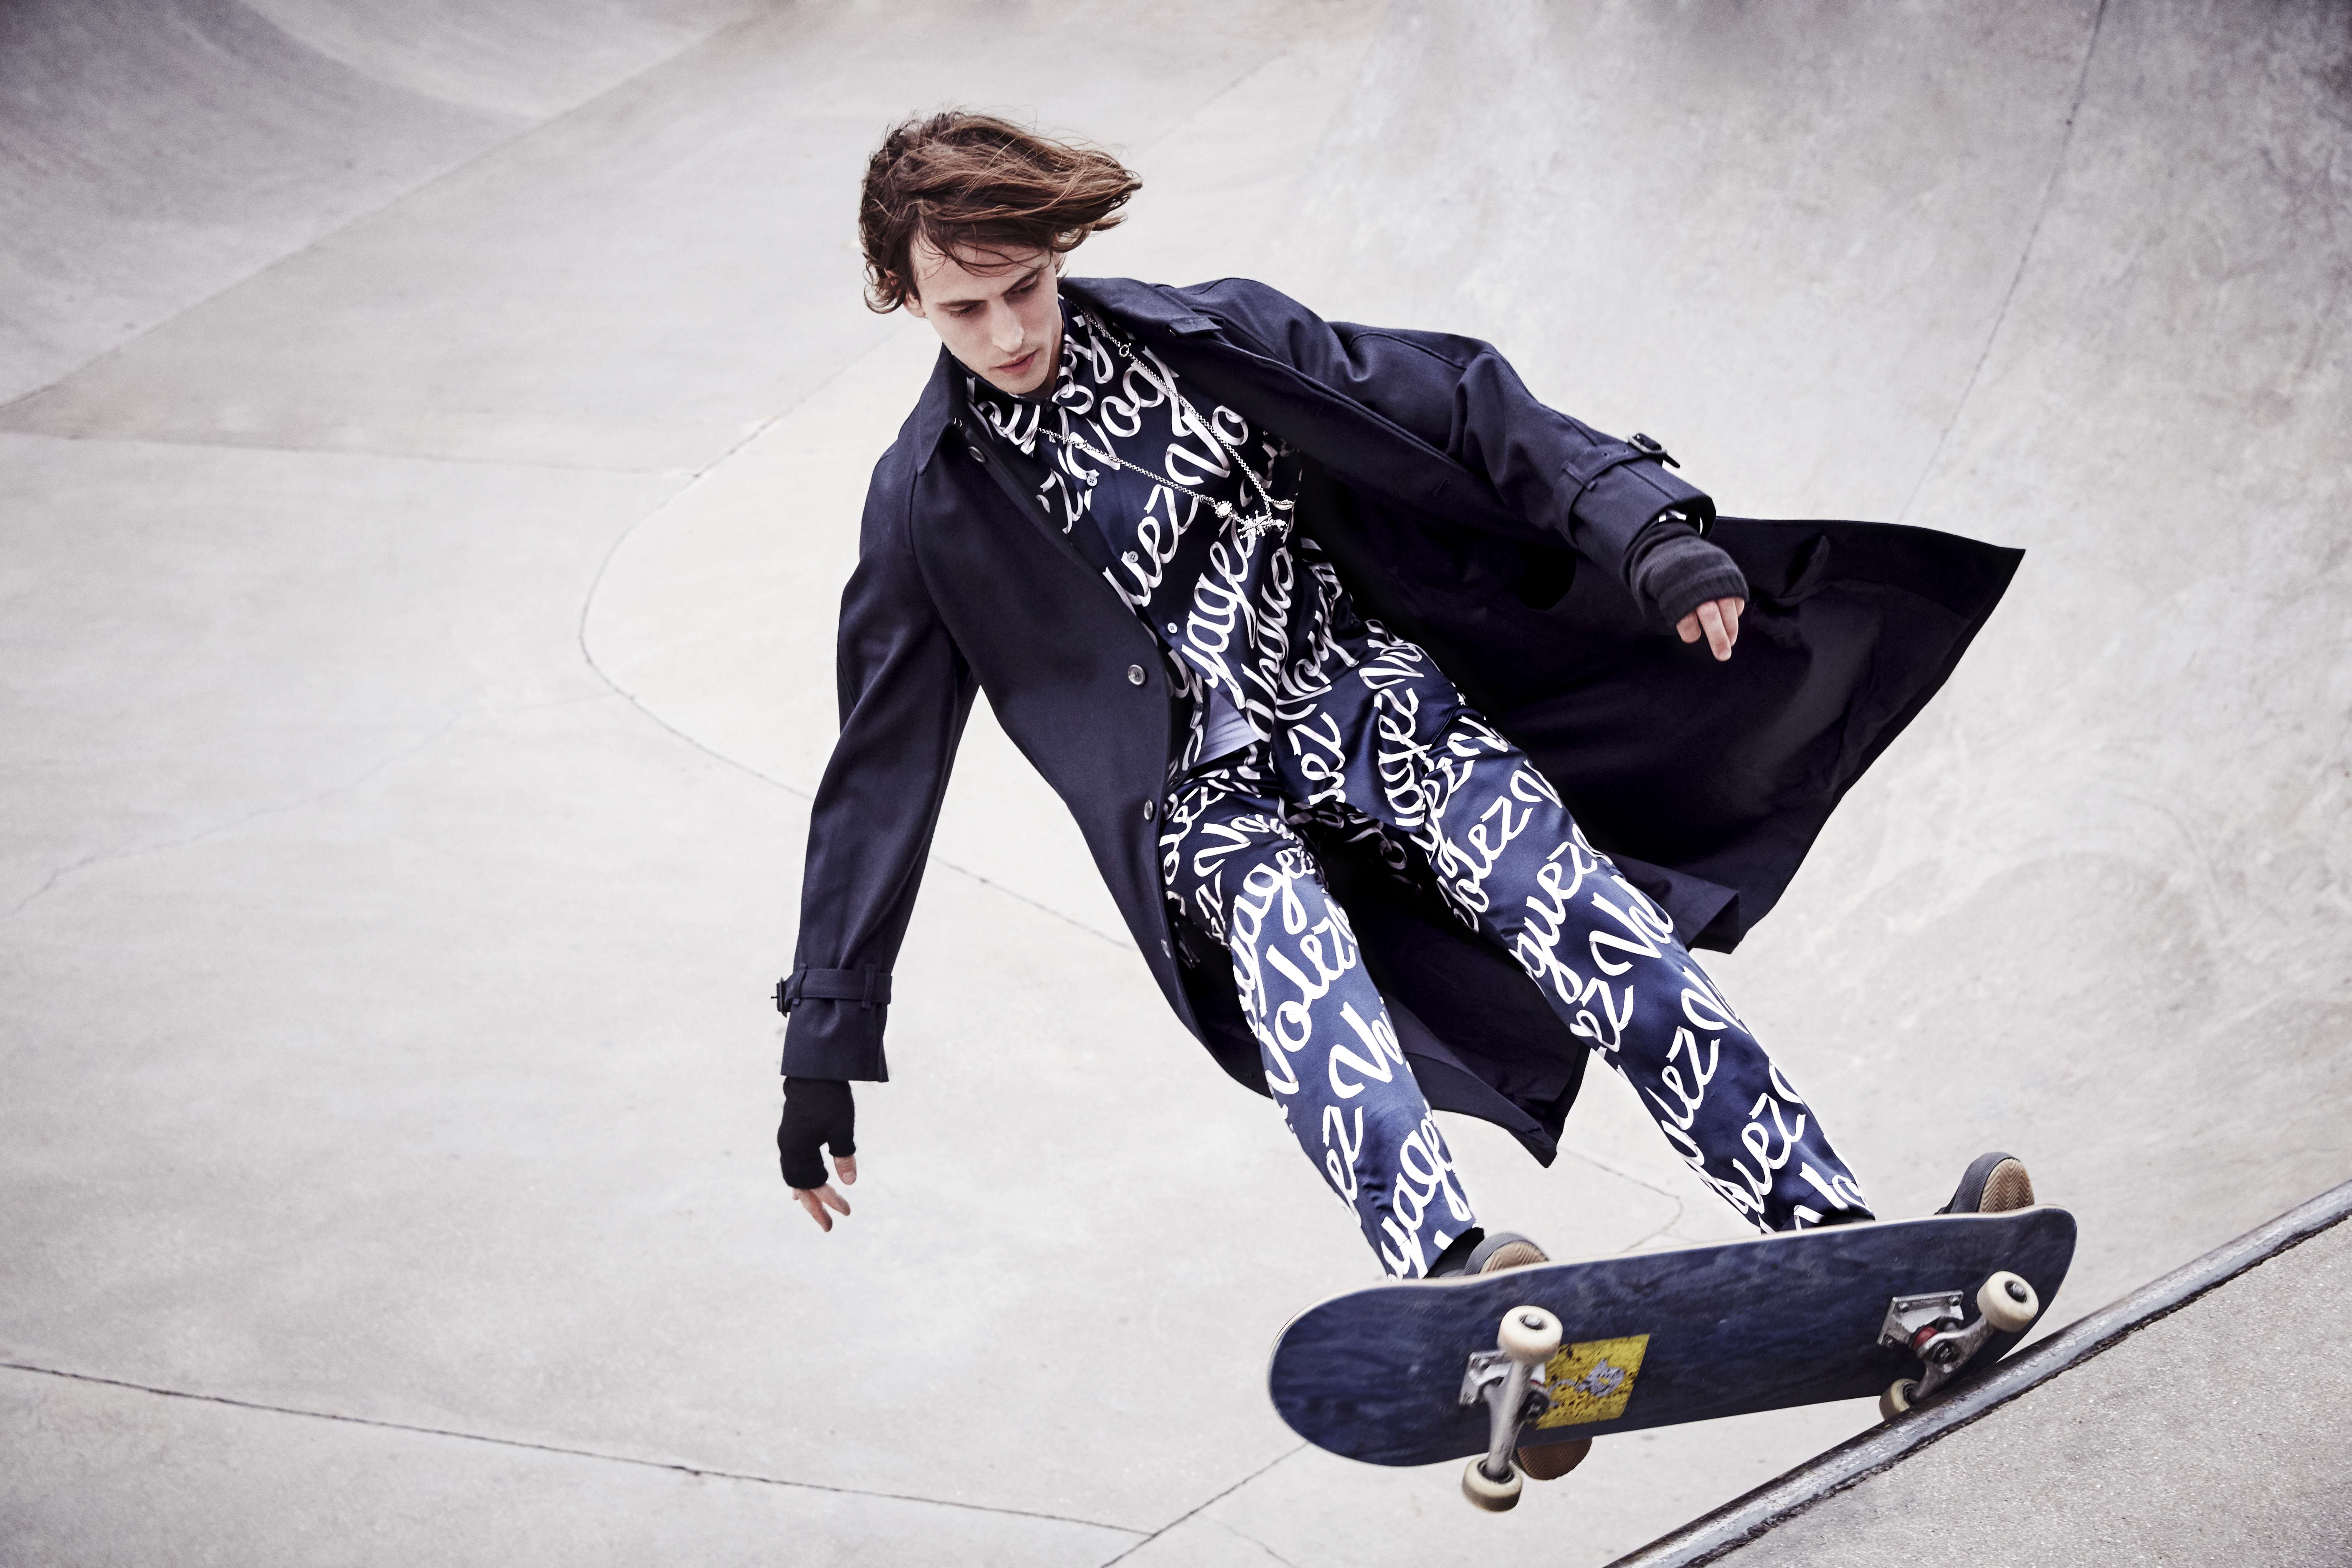 Louis Vuitton, Ermenegildo Zegna Couture and Dior Homme collide with Vans and Rag & Bone down at the skate park